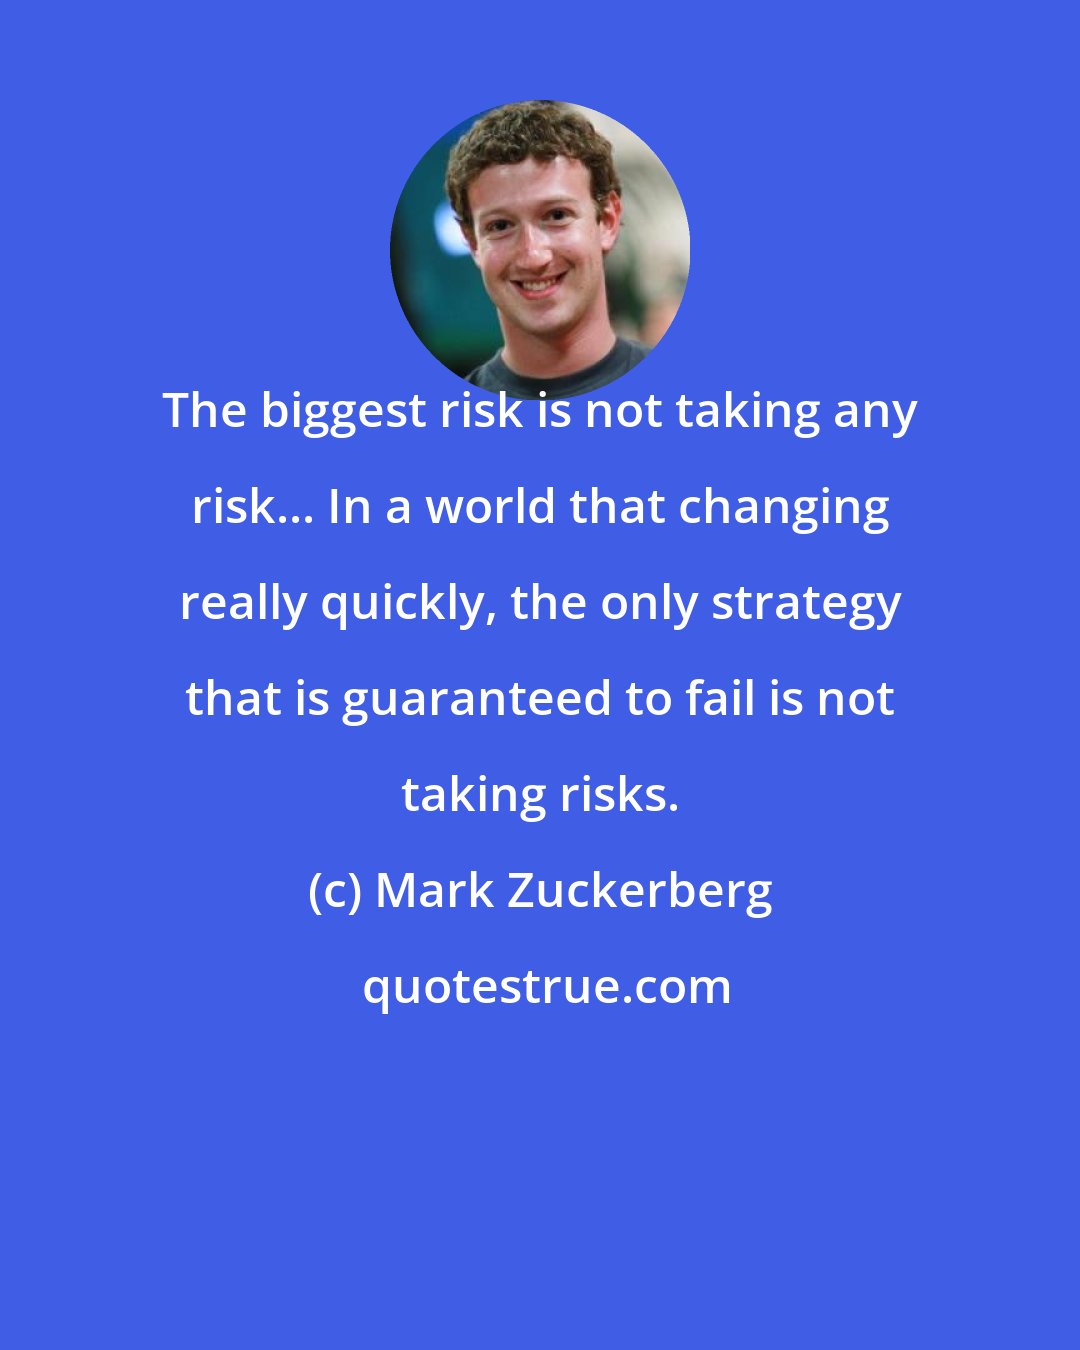 Mark Zuckerberg: The biggest risk is not taking any risk... In a world that changing really quickly, the only strategy that is guaranteed to fail is not taking risks.